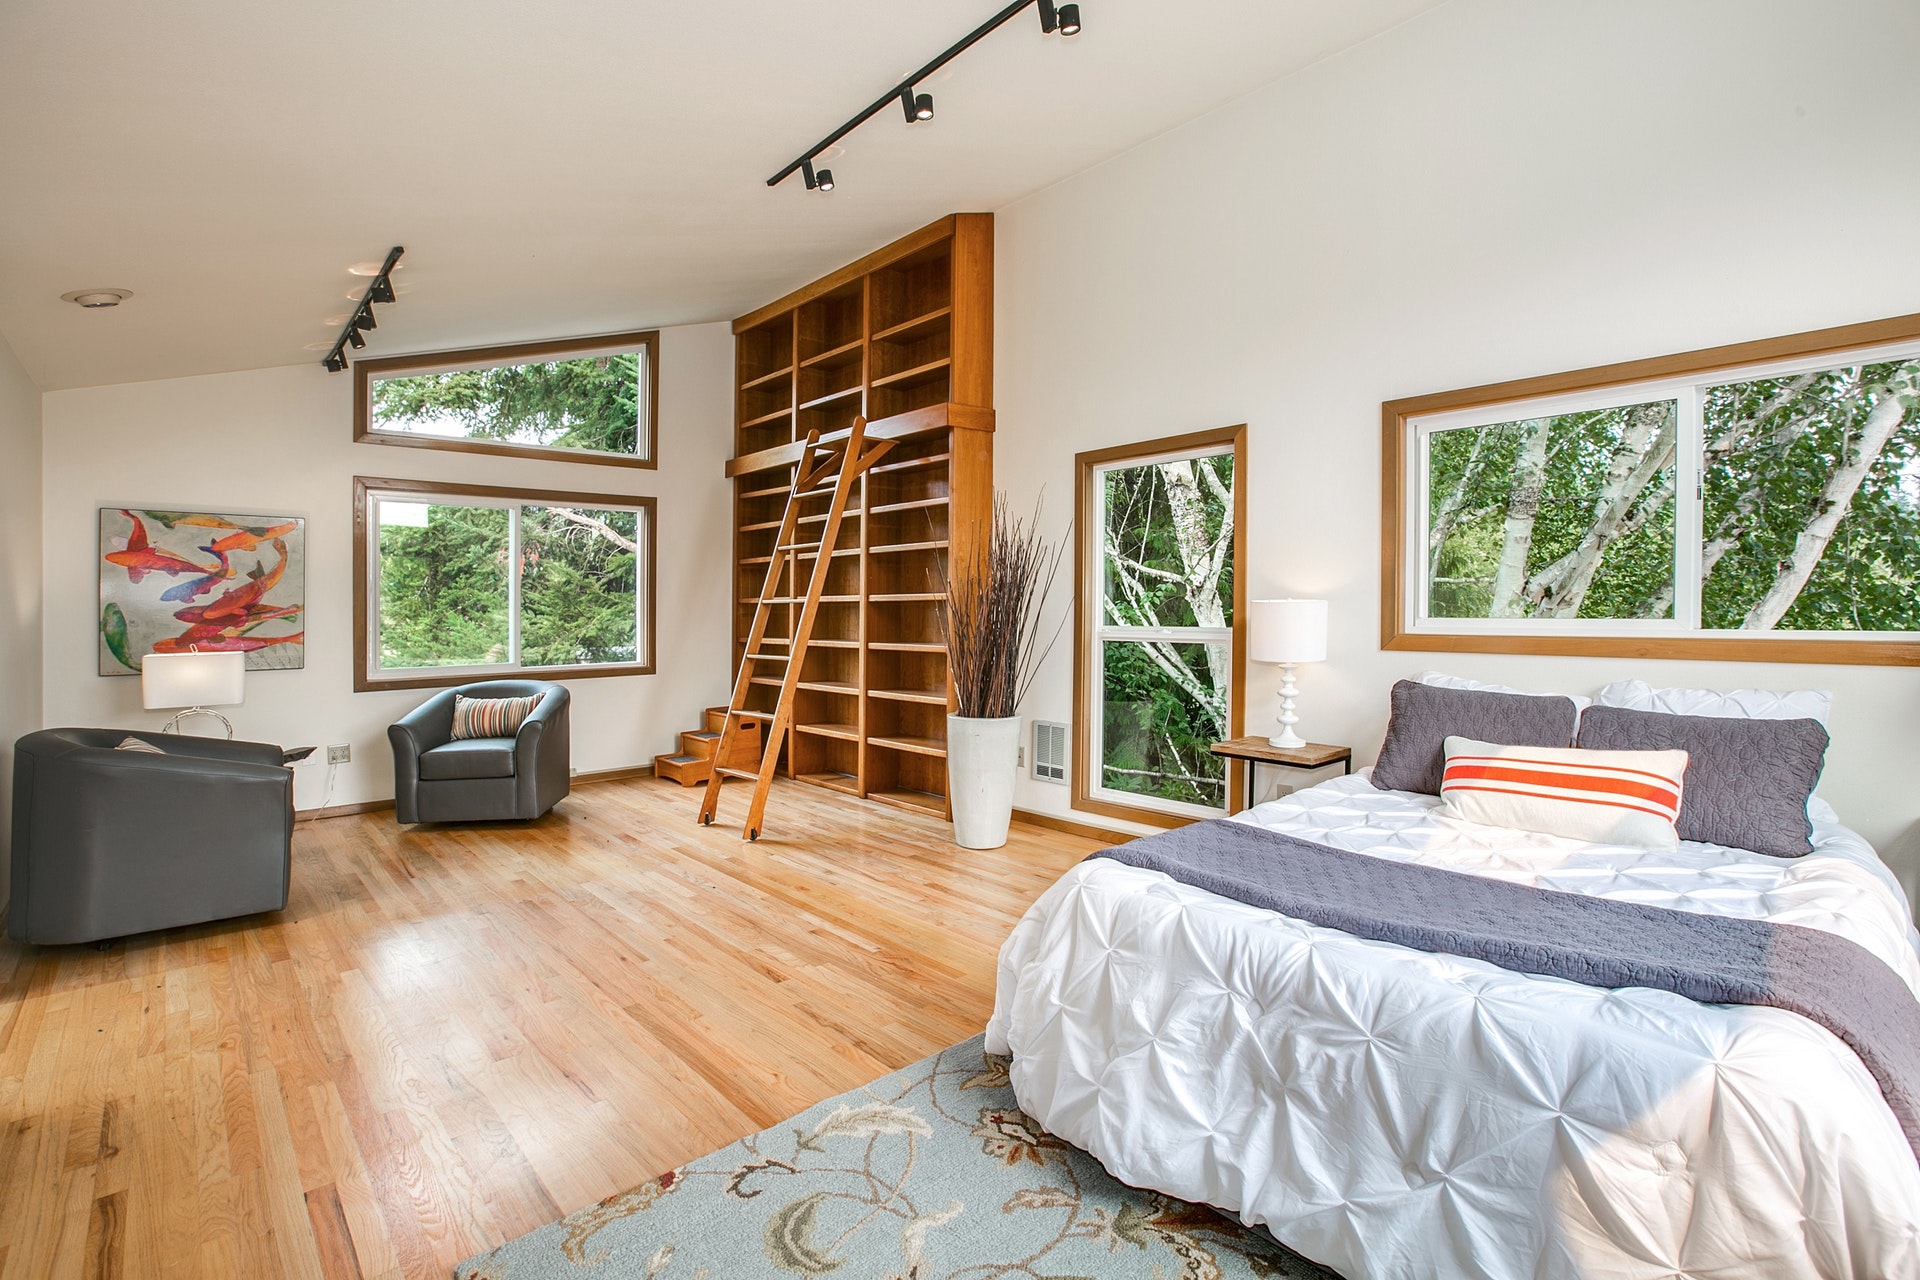 Huge upstairs master suite with full bath and walk in closet enjoy a vaulted ceiling, more picture windows, and a gorgeous hand hewn library bookcase and ladder